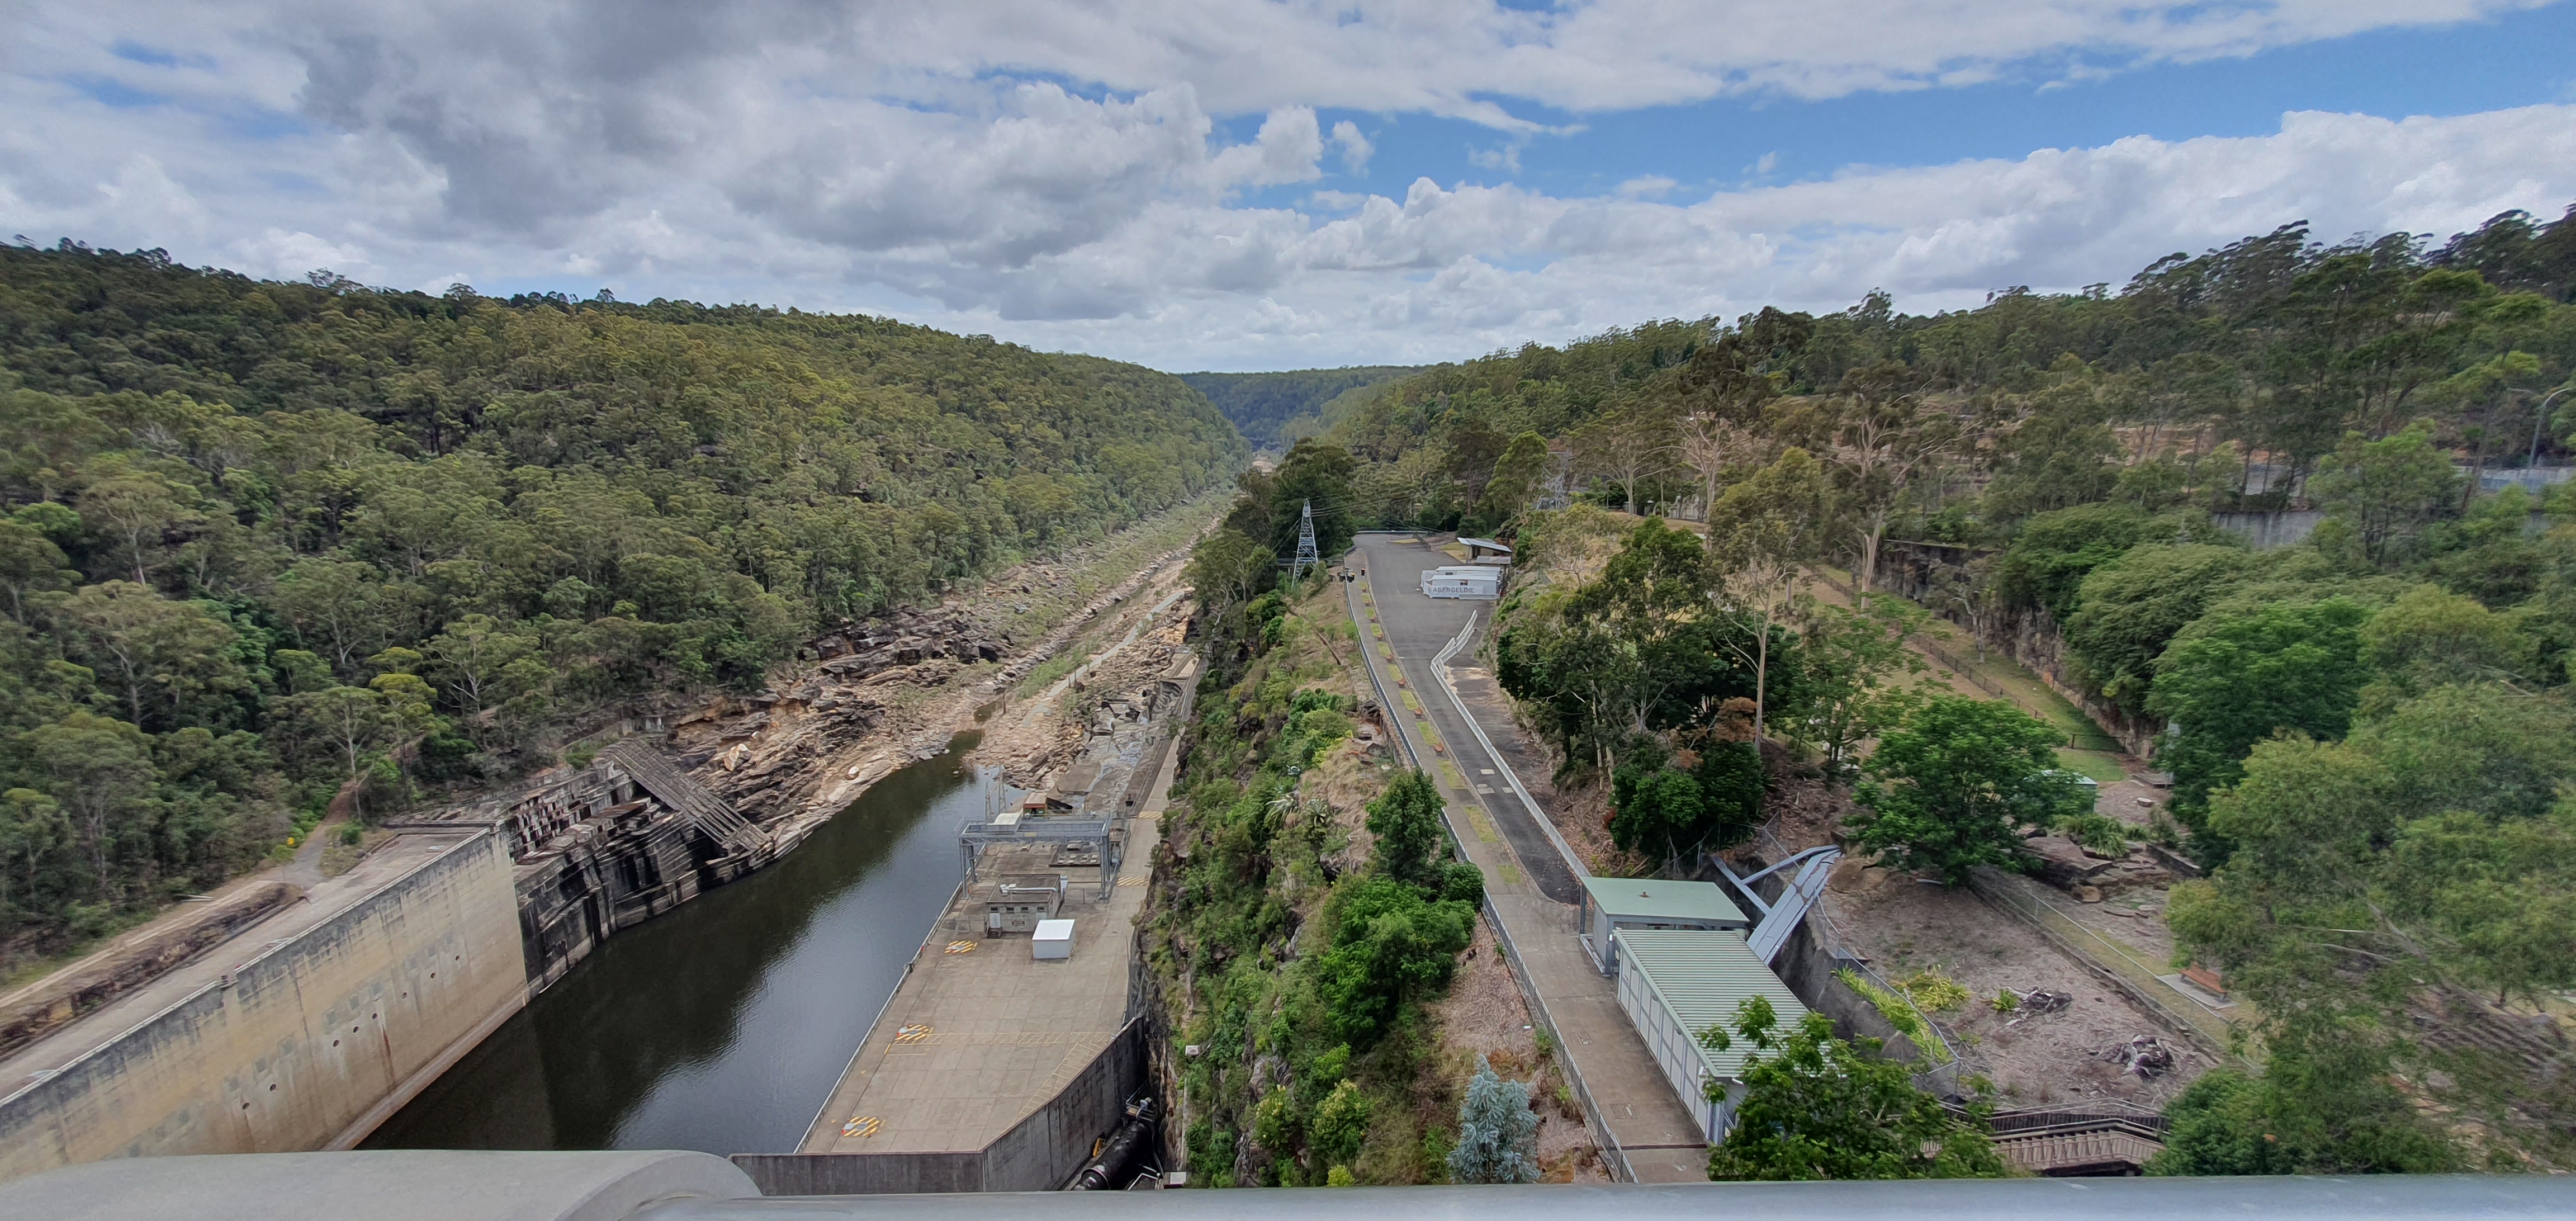 View of the Lower Level from the spillway, Warragamba Dam, 1 January 2023